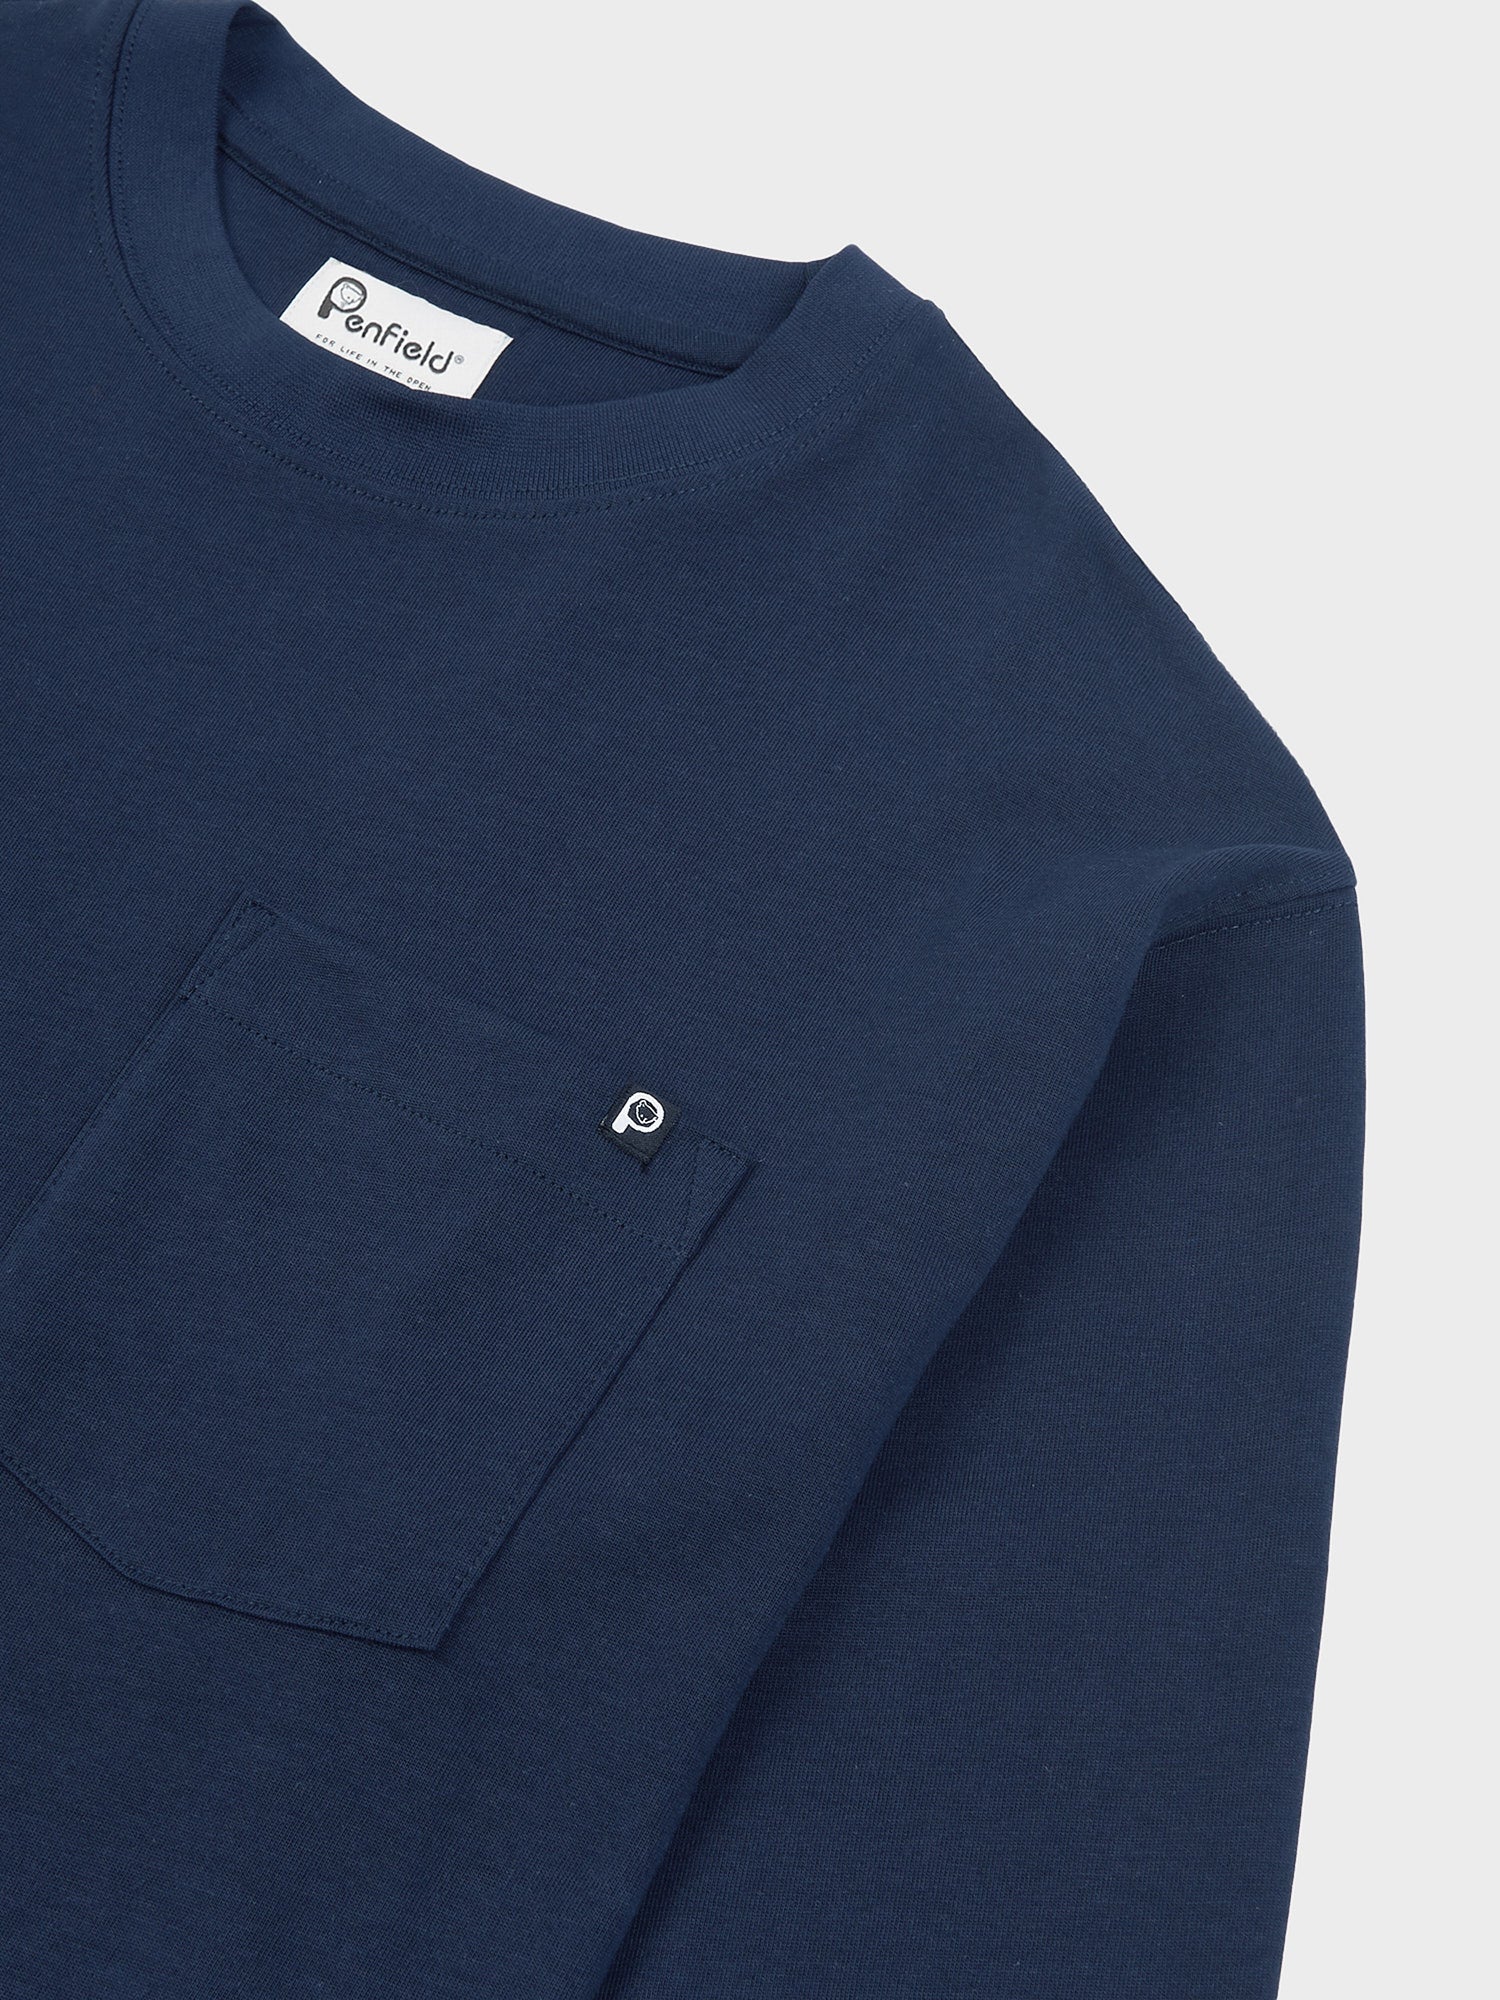 Chest Pocket Long Sleeve T-Shirt in Navy Blue